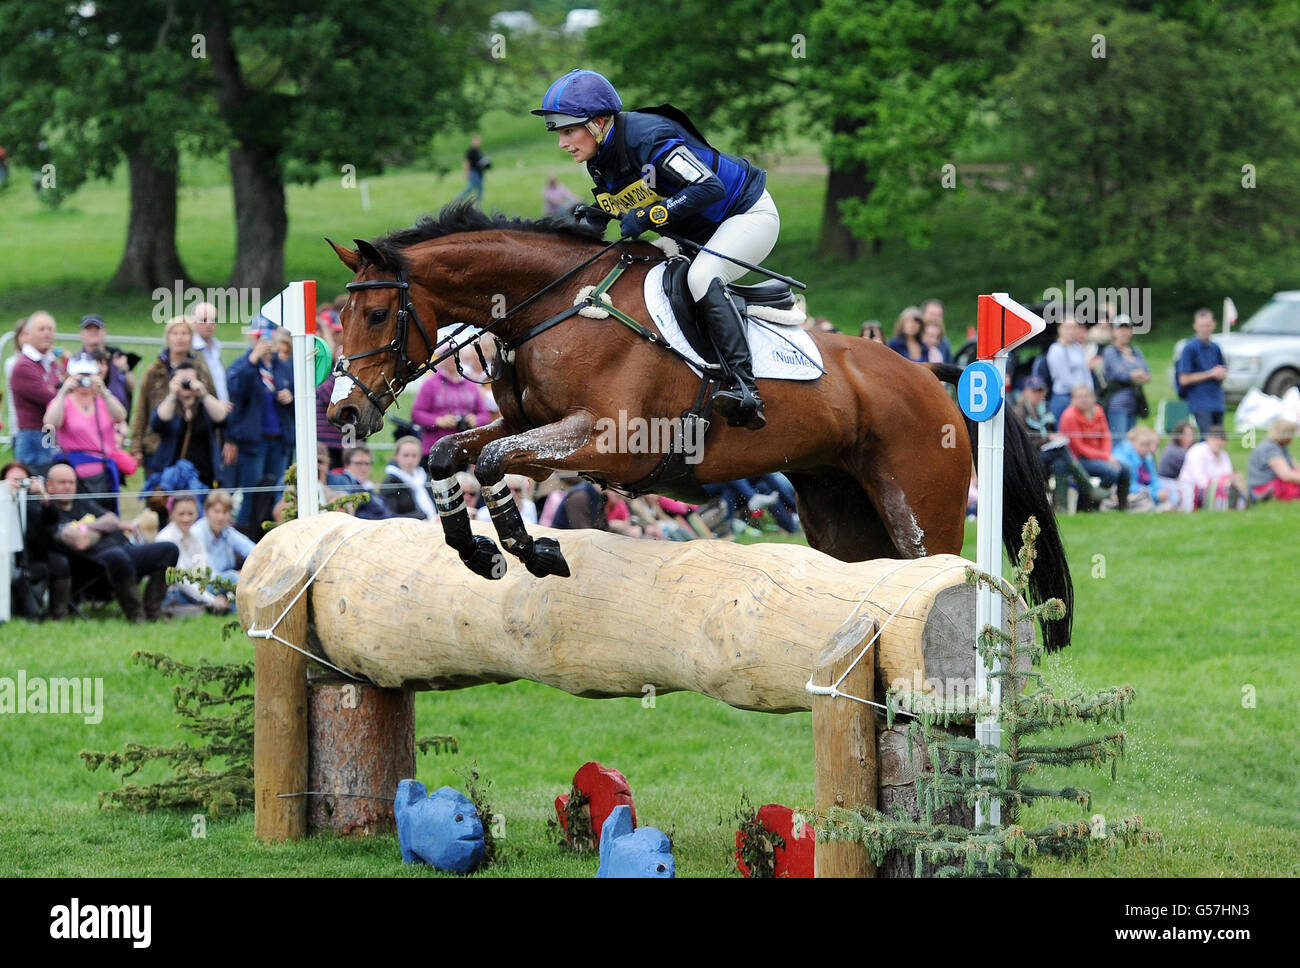 Zara Phillips rides High Kingdom during the CIC*** cross country event  during the Bramham International Horse Trials at Bramham Park, Wetherby  Stock Photo - Alamy